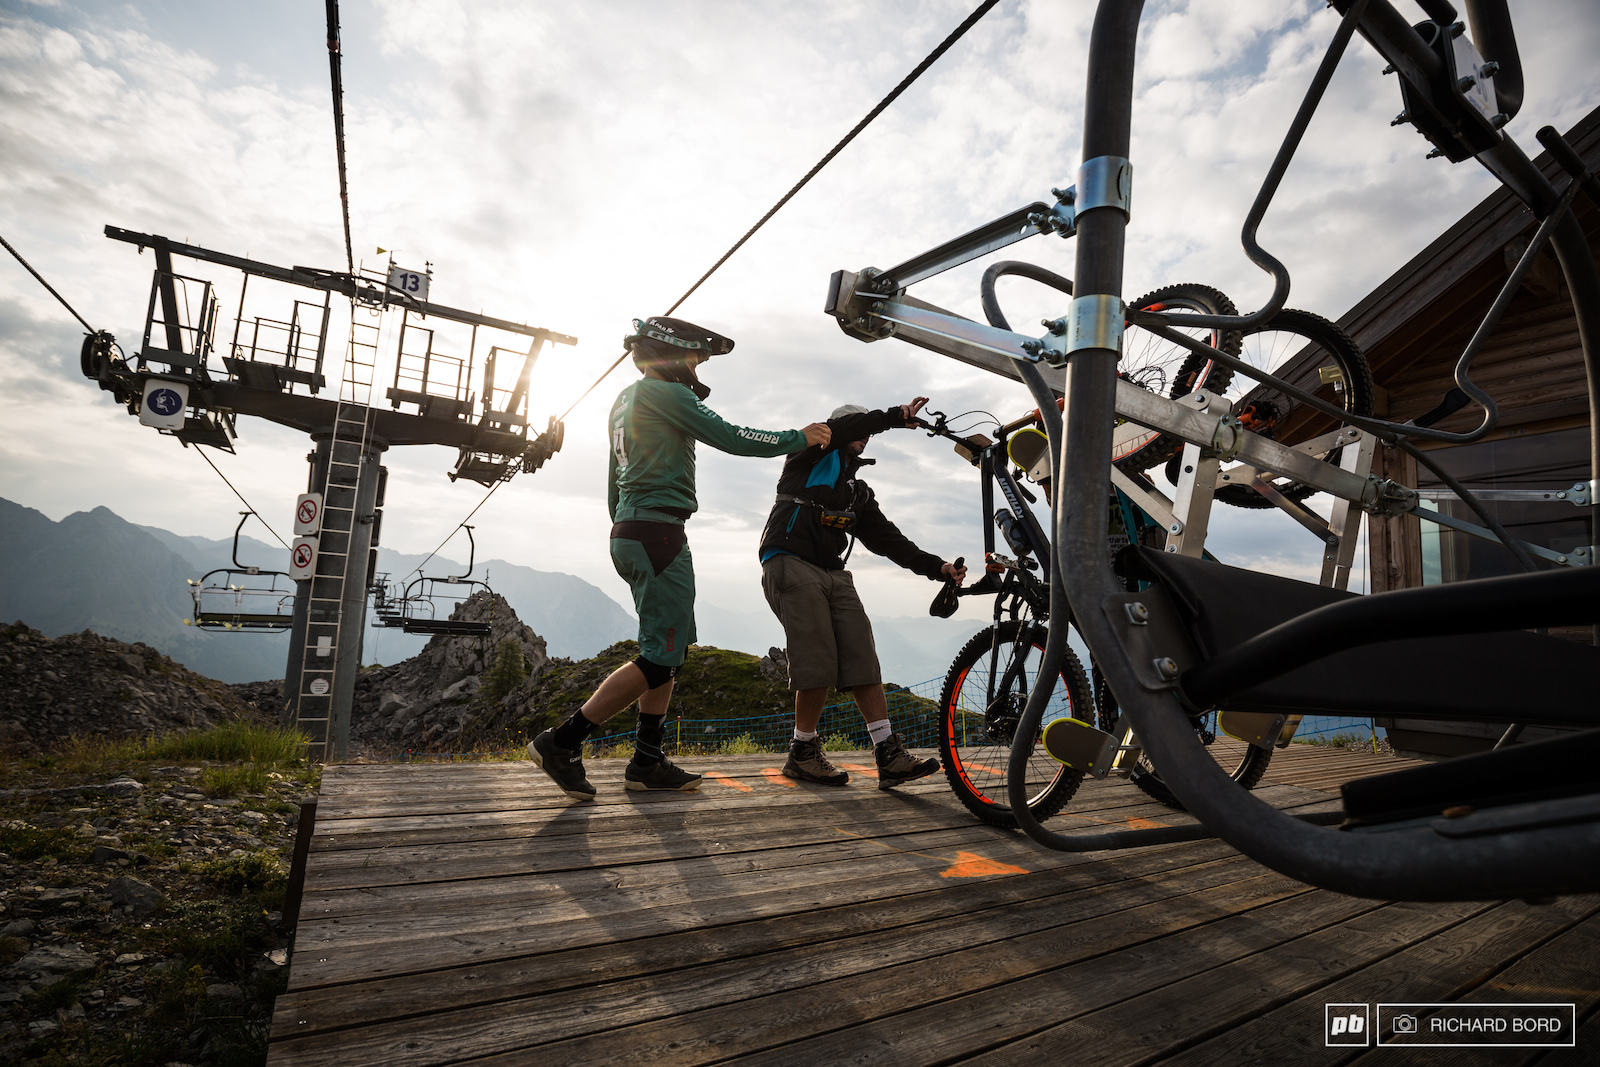 Two chairlifts meant only 600 m pedaling up during all the week-end.